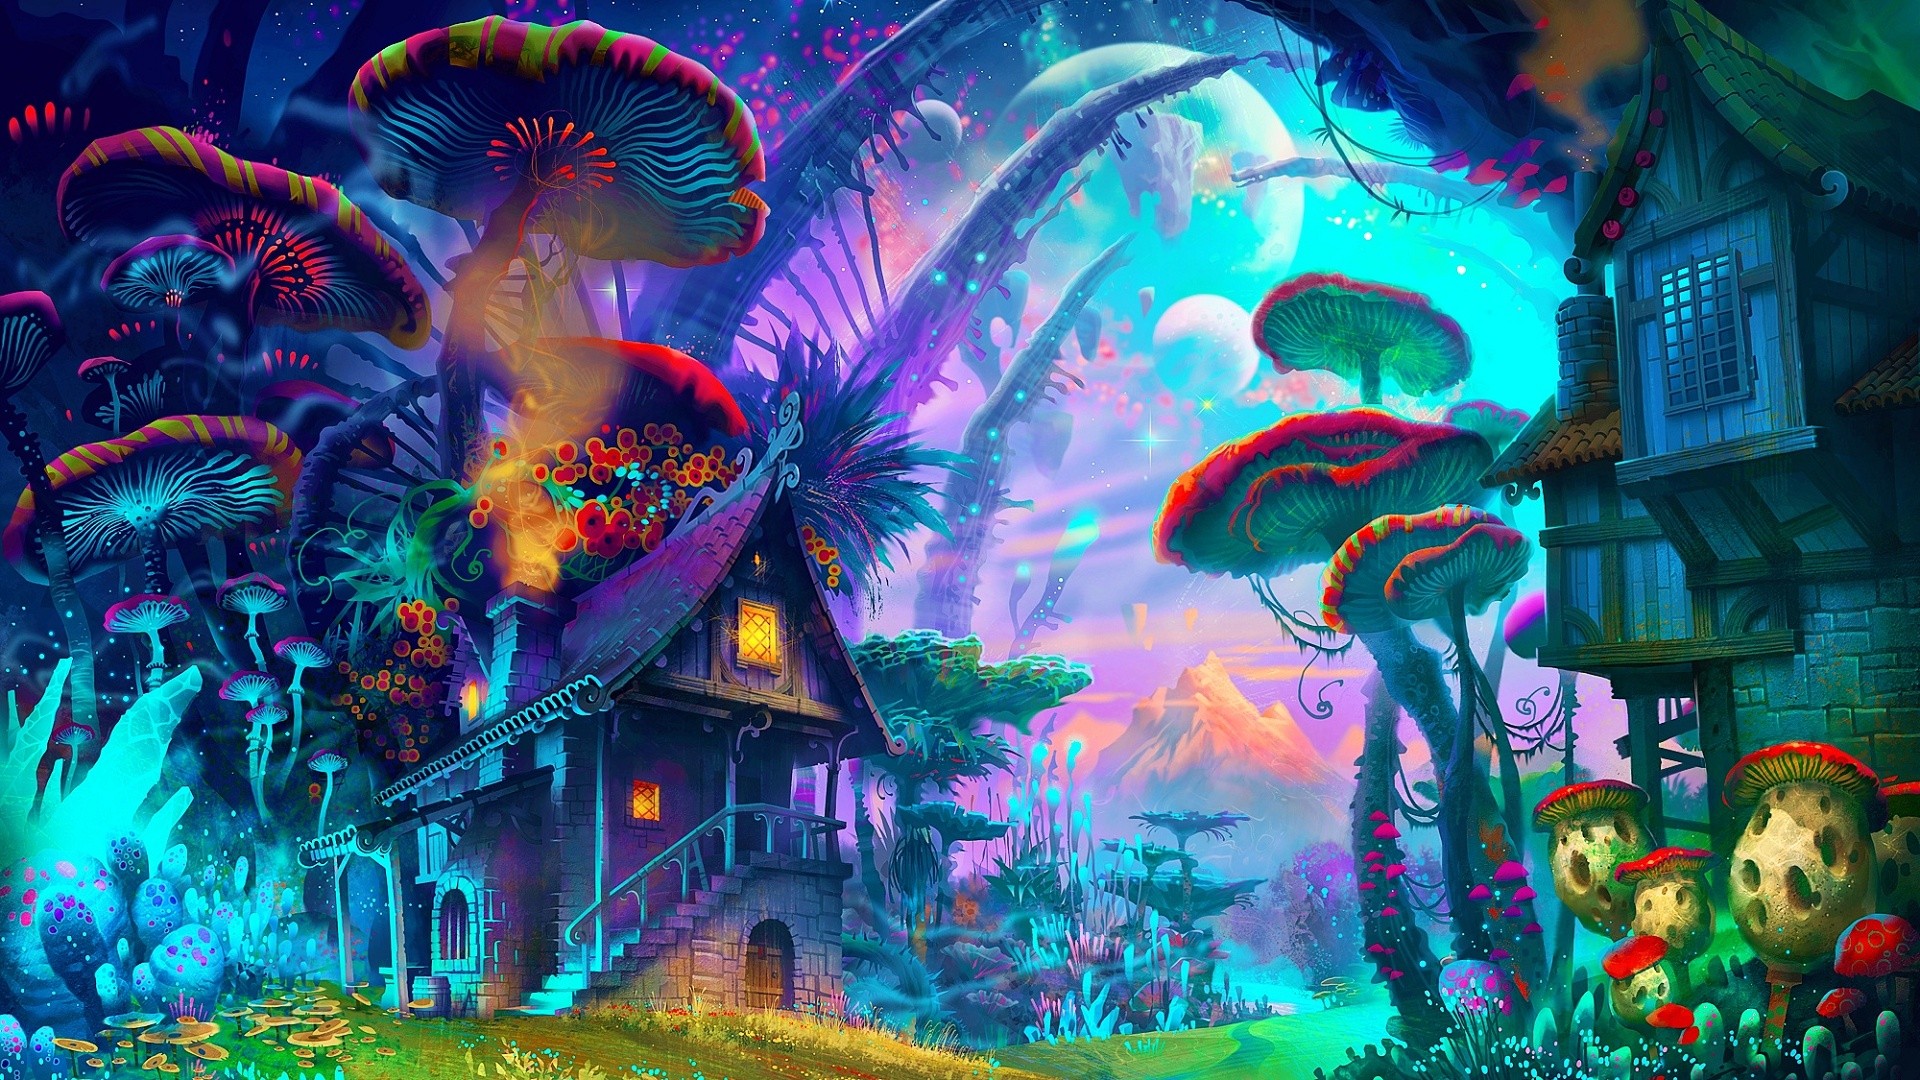 General 1920x1080 fantasy art drawing nature psychedelic colorful house mushroom planet plants mountains cyan purple